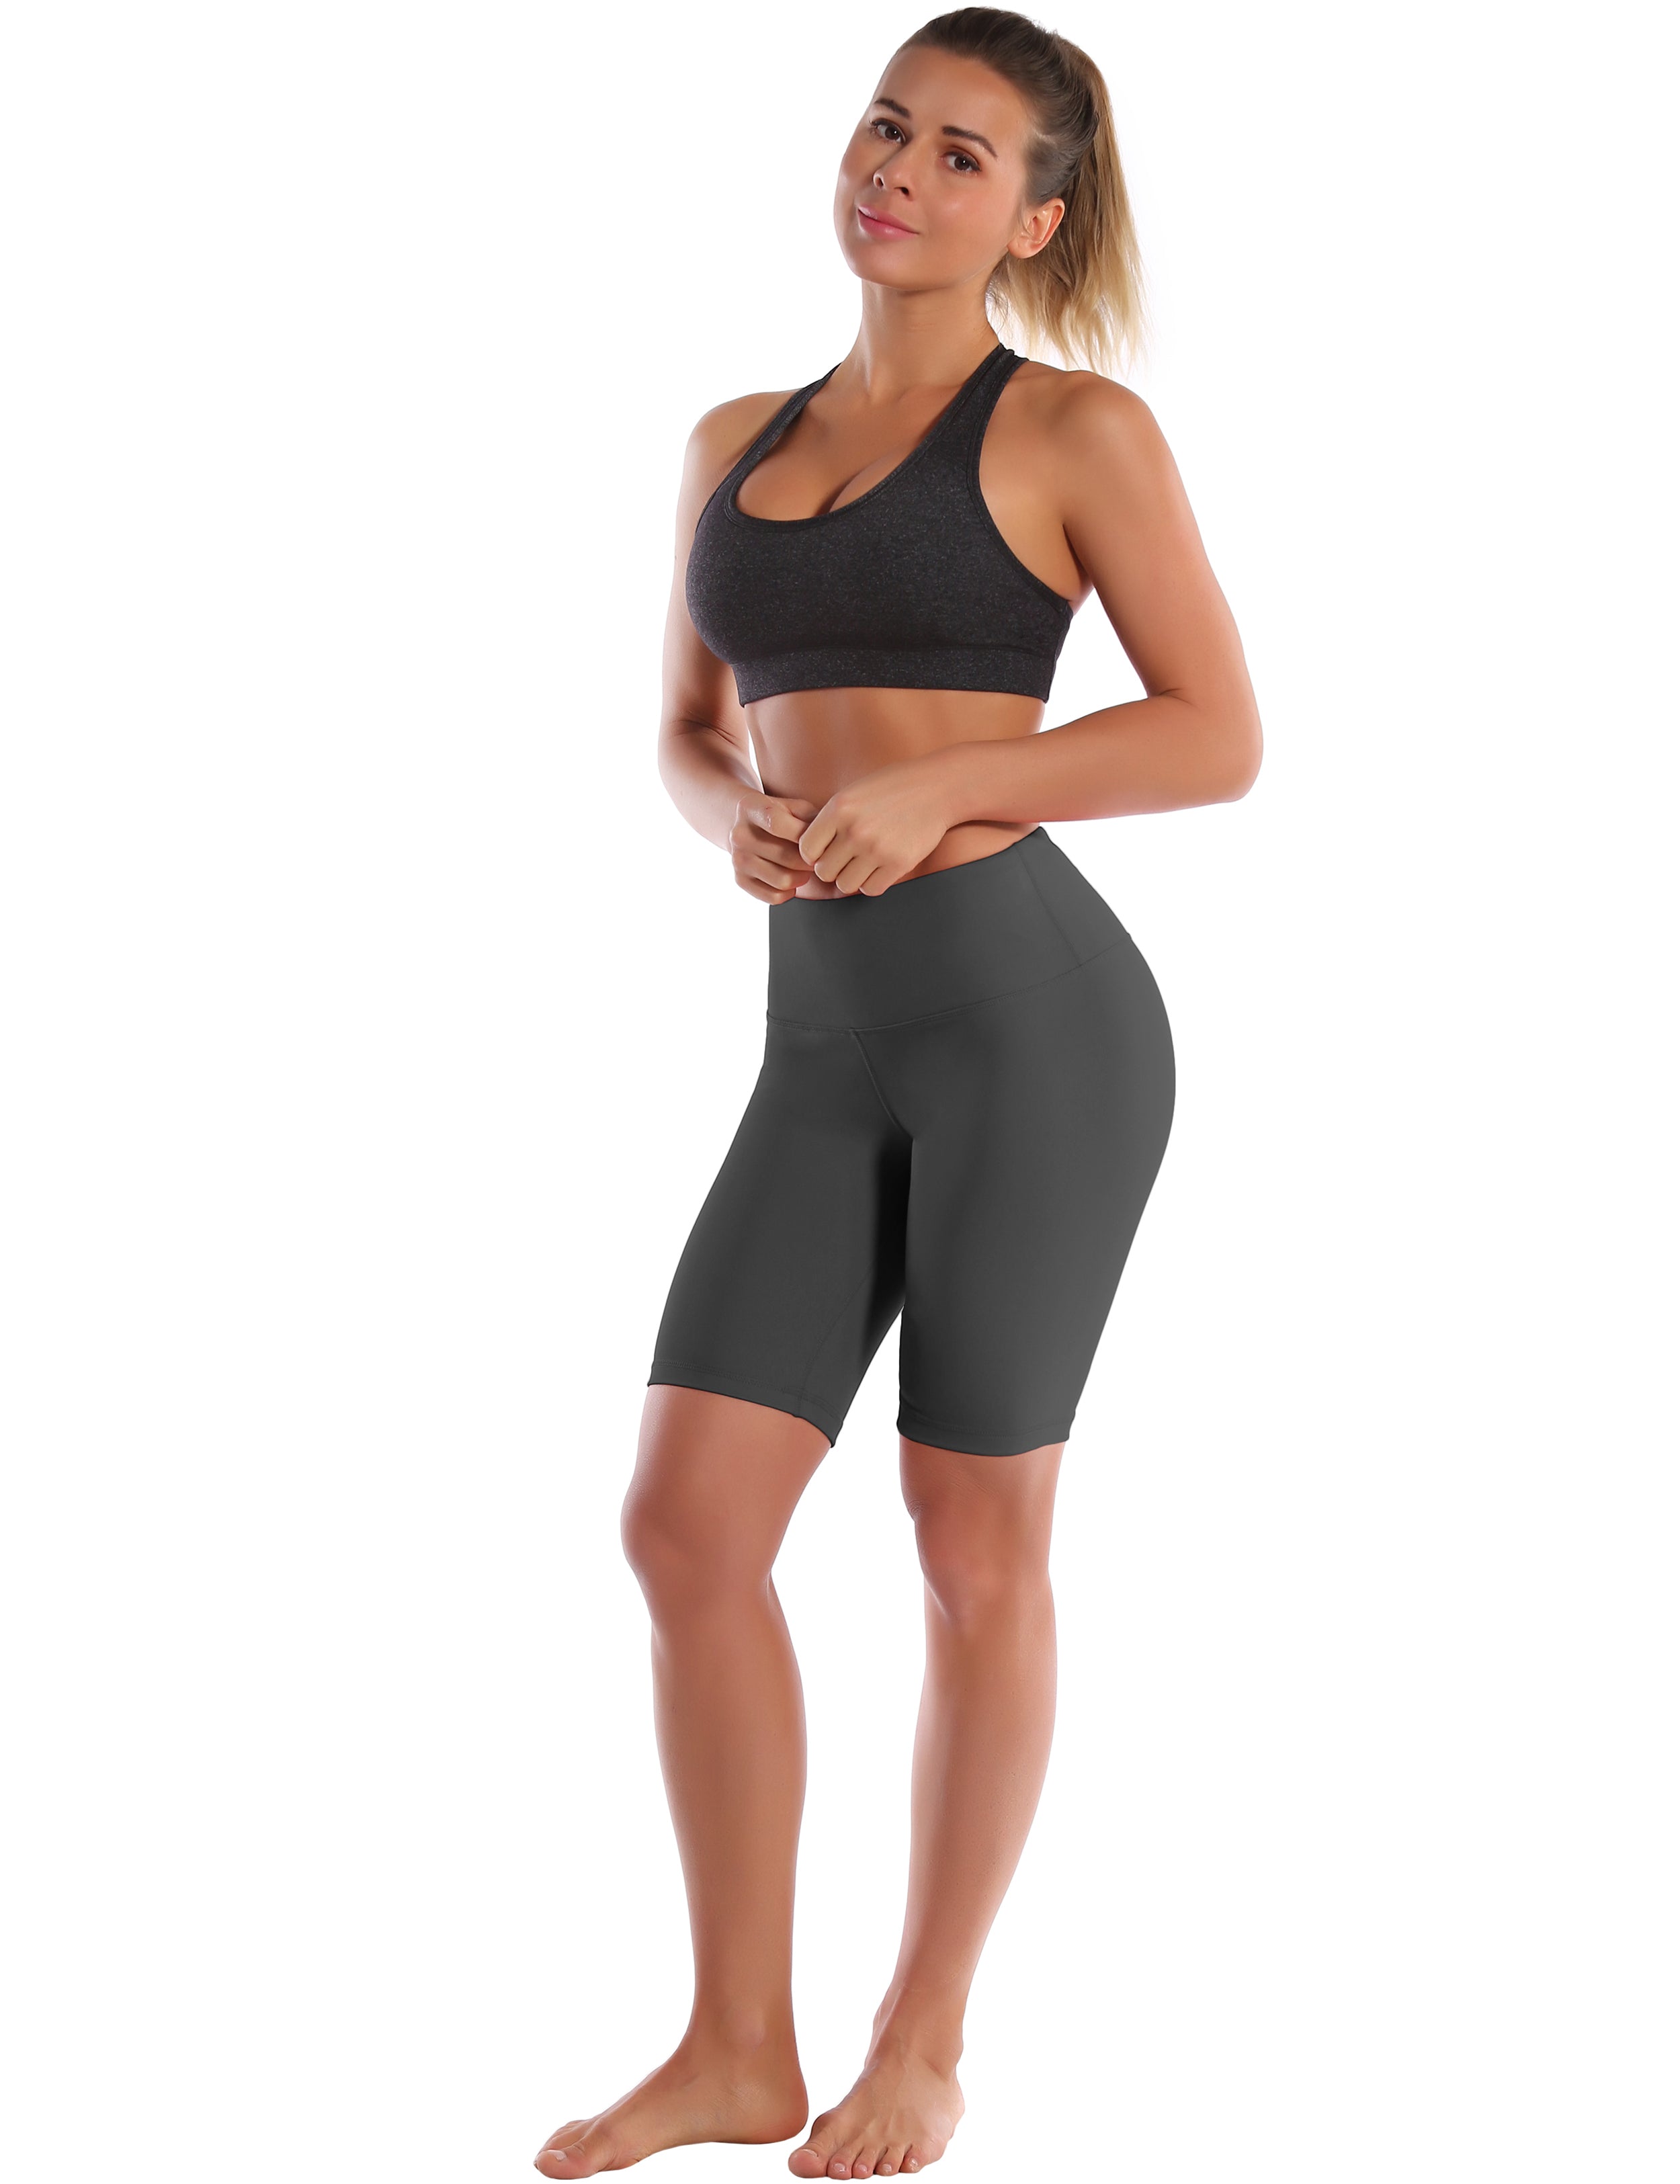 8" High Waist Running Shorts shadowcharcoal Sleek, soft, smooth and totally comfortable: our newest style is here. Softest-ever fabric High elasticity High density 4-way stretch Fabric doesn't attract lint easily No see-through Moisture-wicking Machine wash 75% Nylon, 25% Spandex